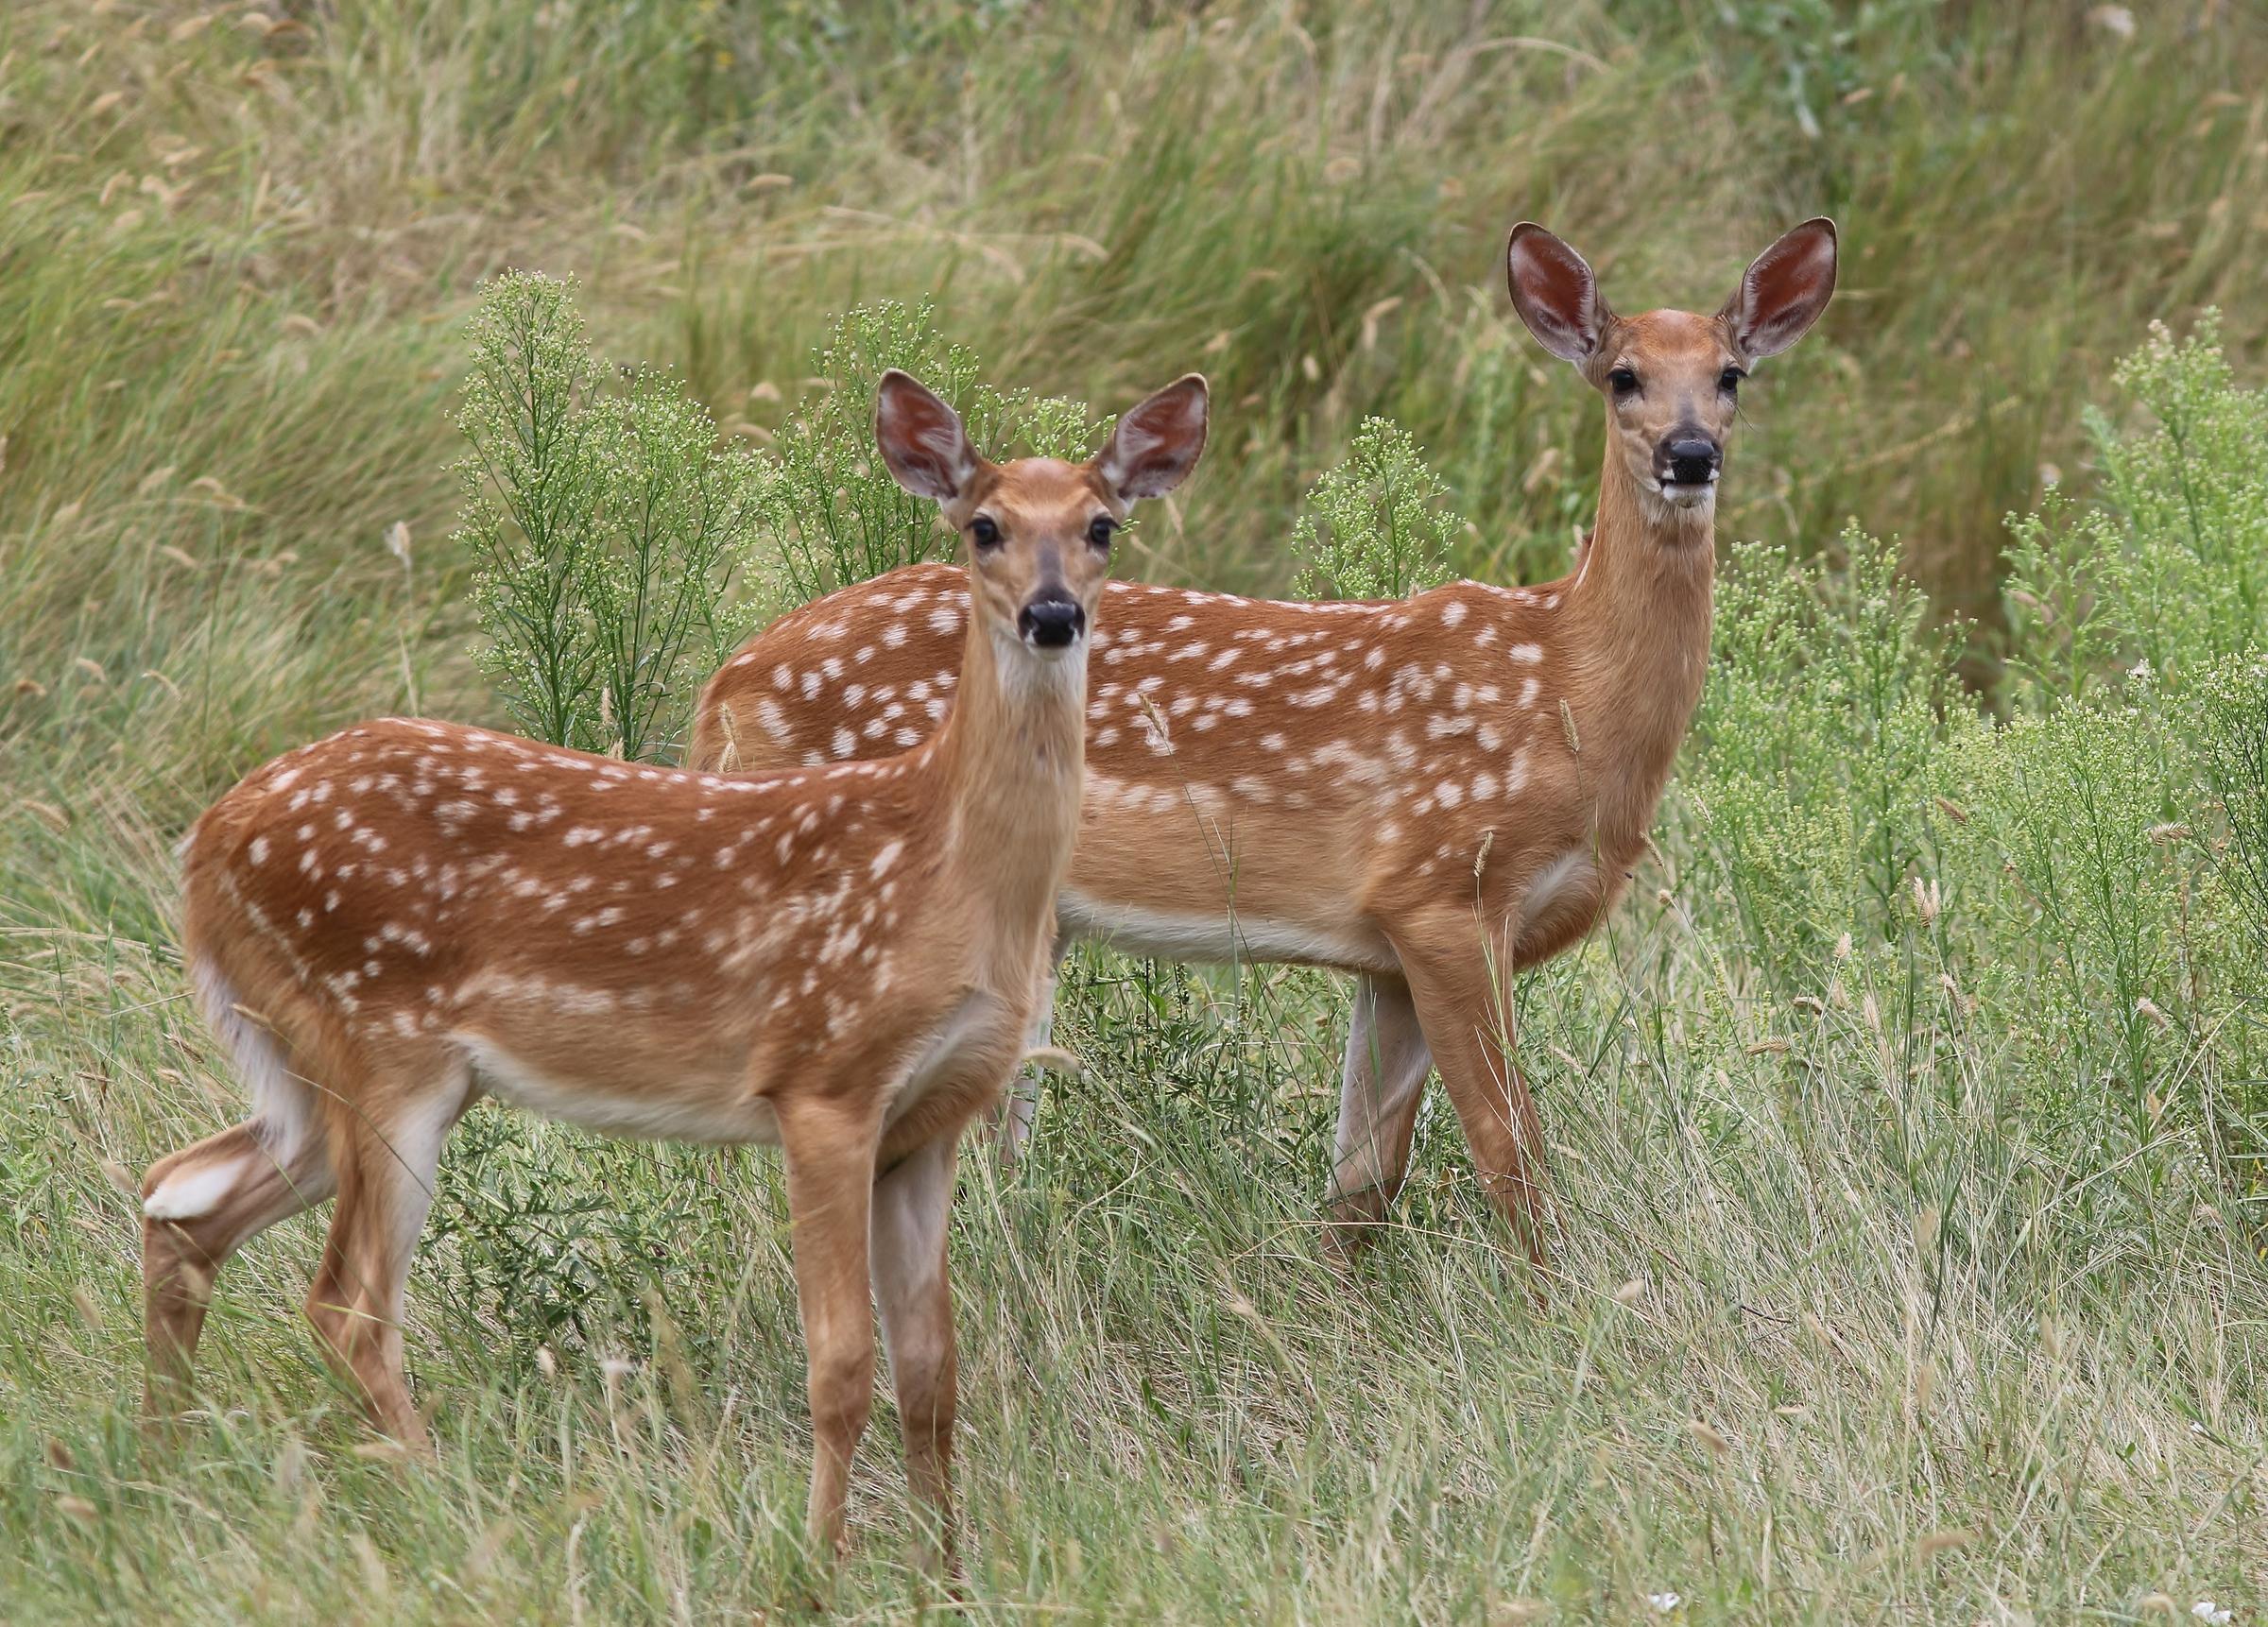 EHD Outbreak Affecting White-Tailed Deer Population | Tri States ...